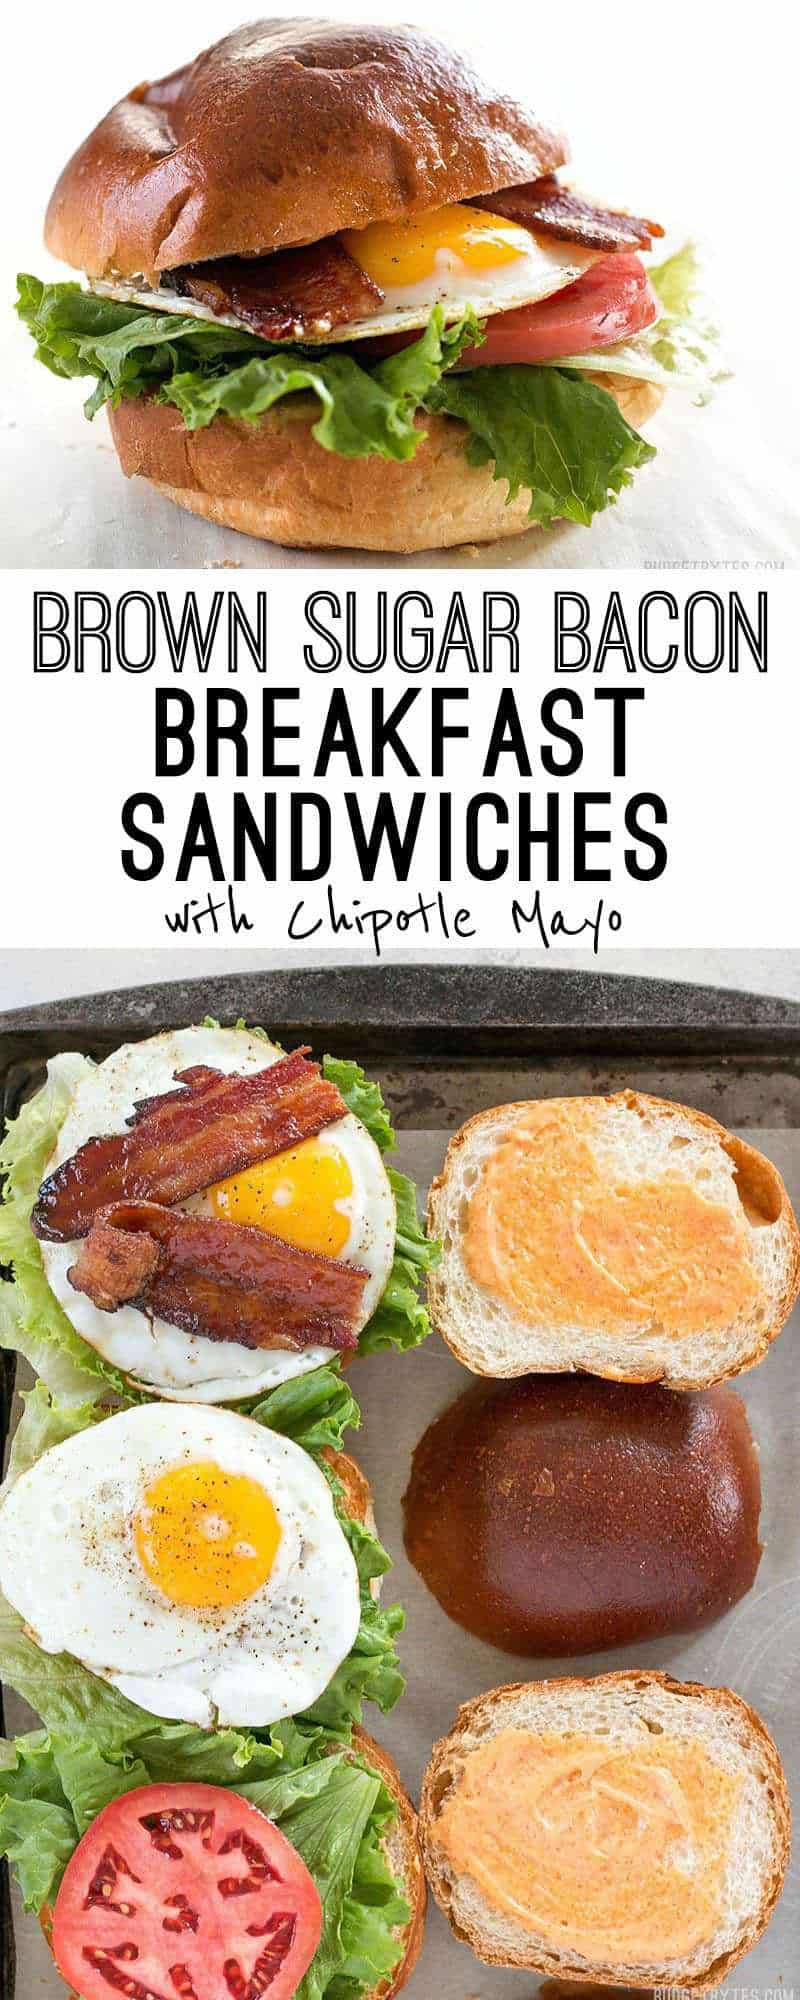 Brown Sugar Bacon Breakfast Sandwiches with Chipotle Mayo are the perfect mix of salty, sweet, and spicy for your weekend brunch. BudgetBytes.com